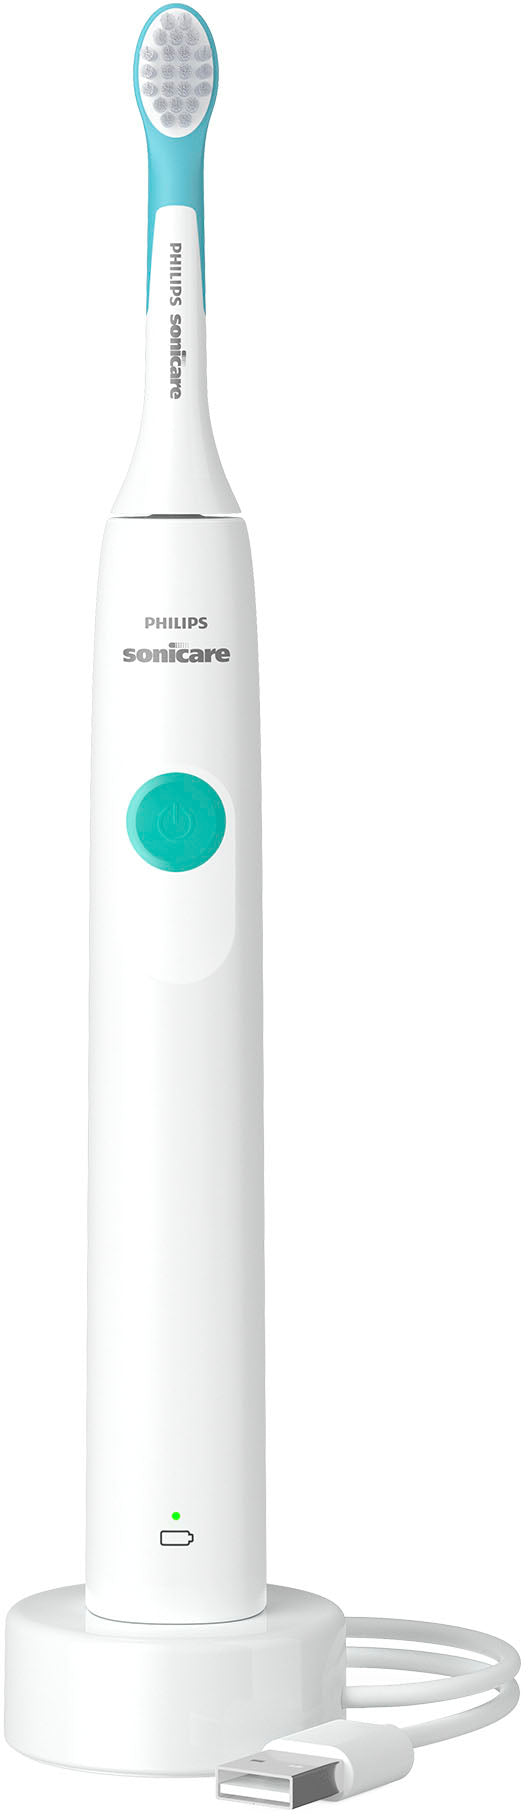 Philips Sonicare - Sonicare for Kids Design a Pet Edition Electric Toothbrush - White With Aqua Blue Button_8